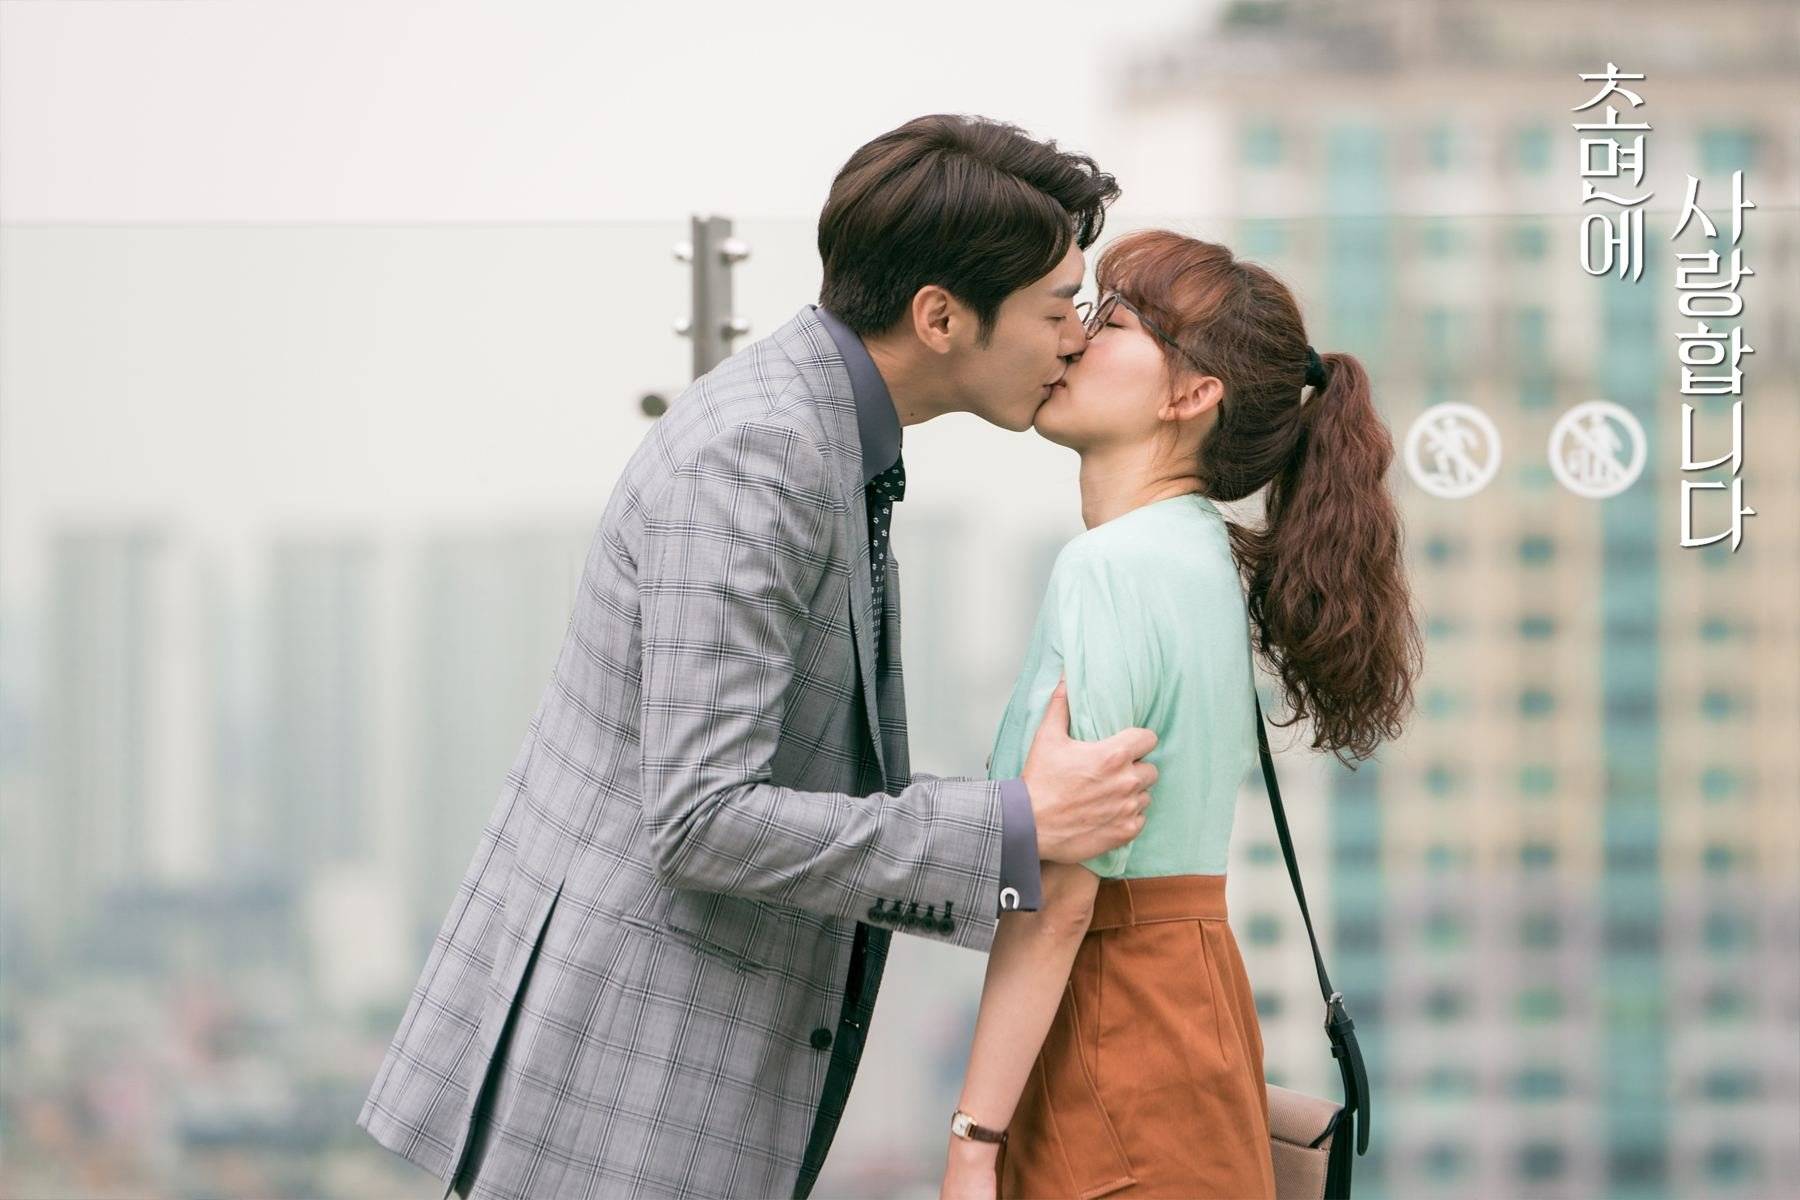 Photos New Stills And Behind The Scenes Images Added For The Korean Drama The Secret Life Of My Secretary Hancinema